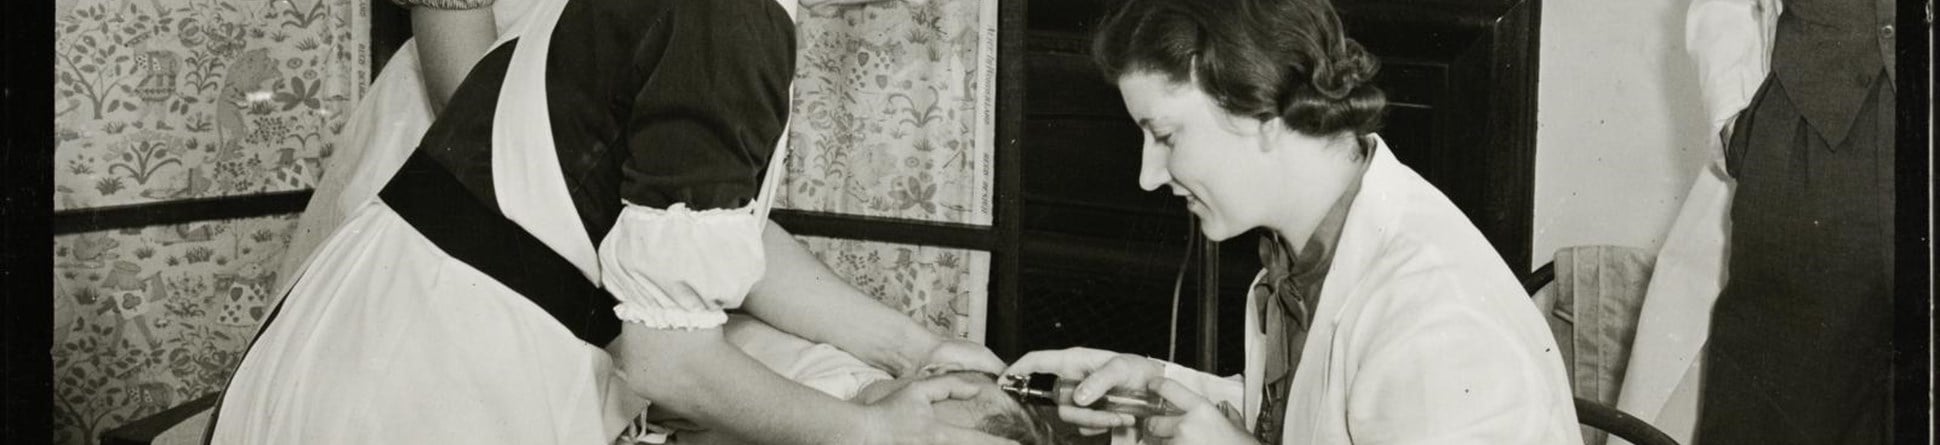 A doctor giving a blood transfusion to a baby by a scalp vein